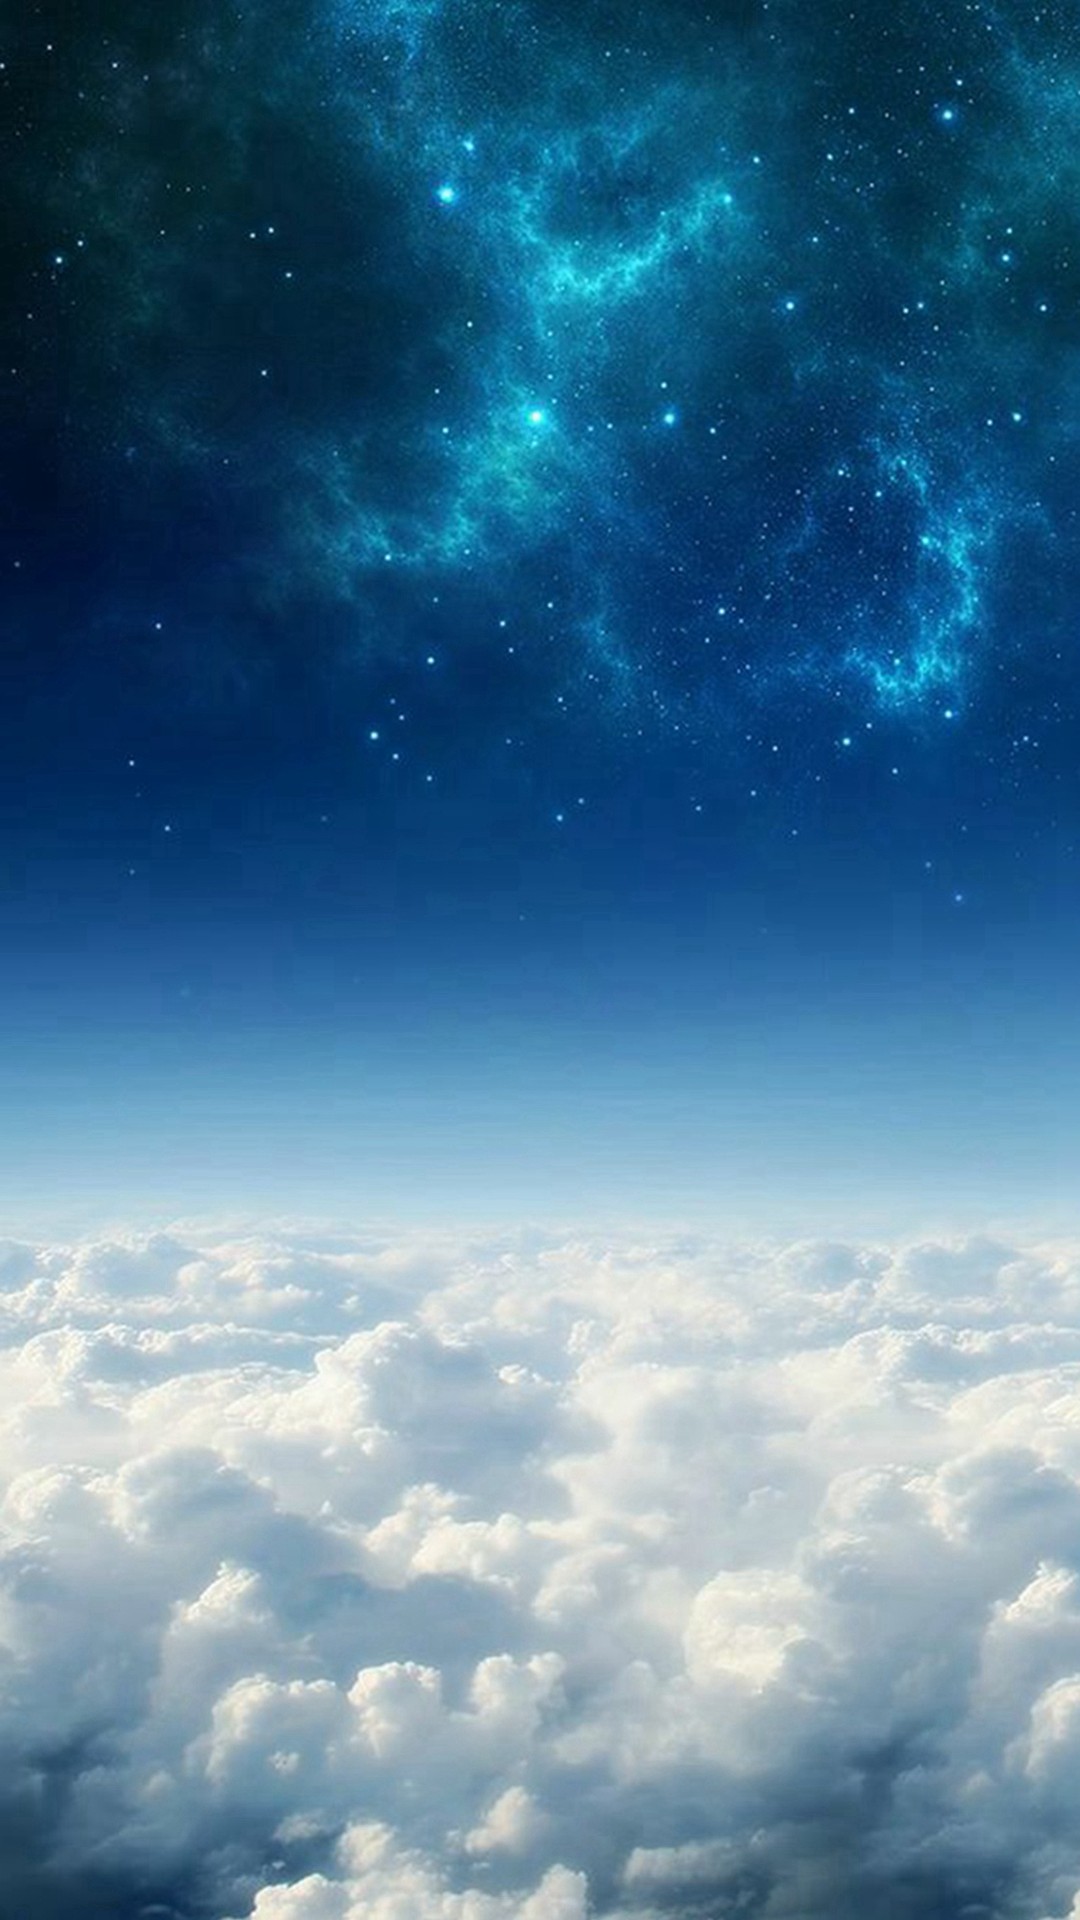 The Sky And The Universe Iphone Wallpapers